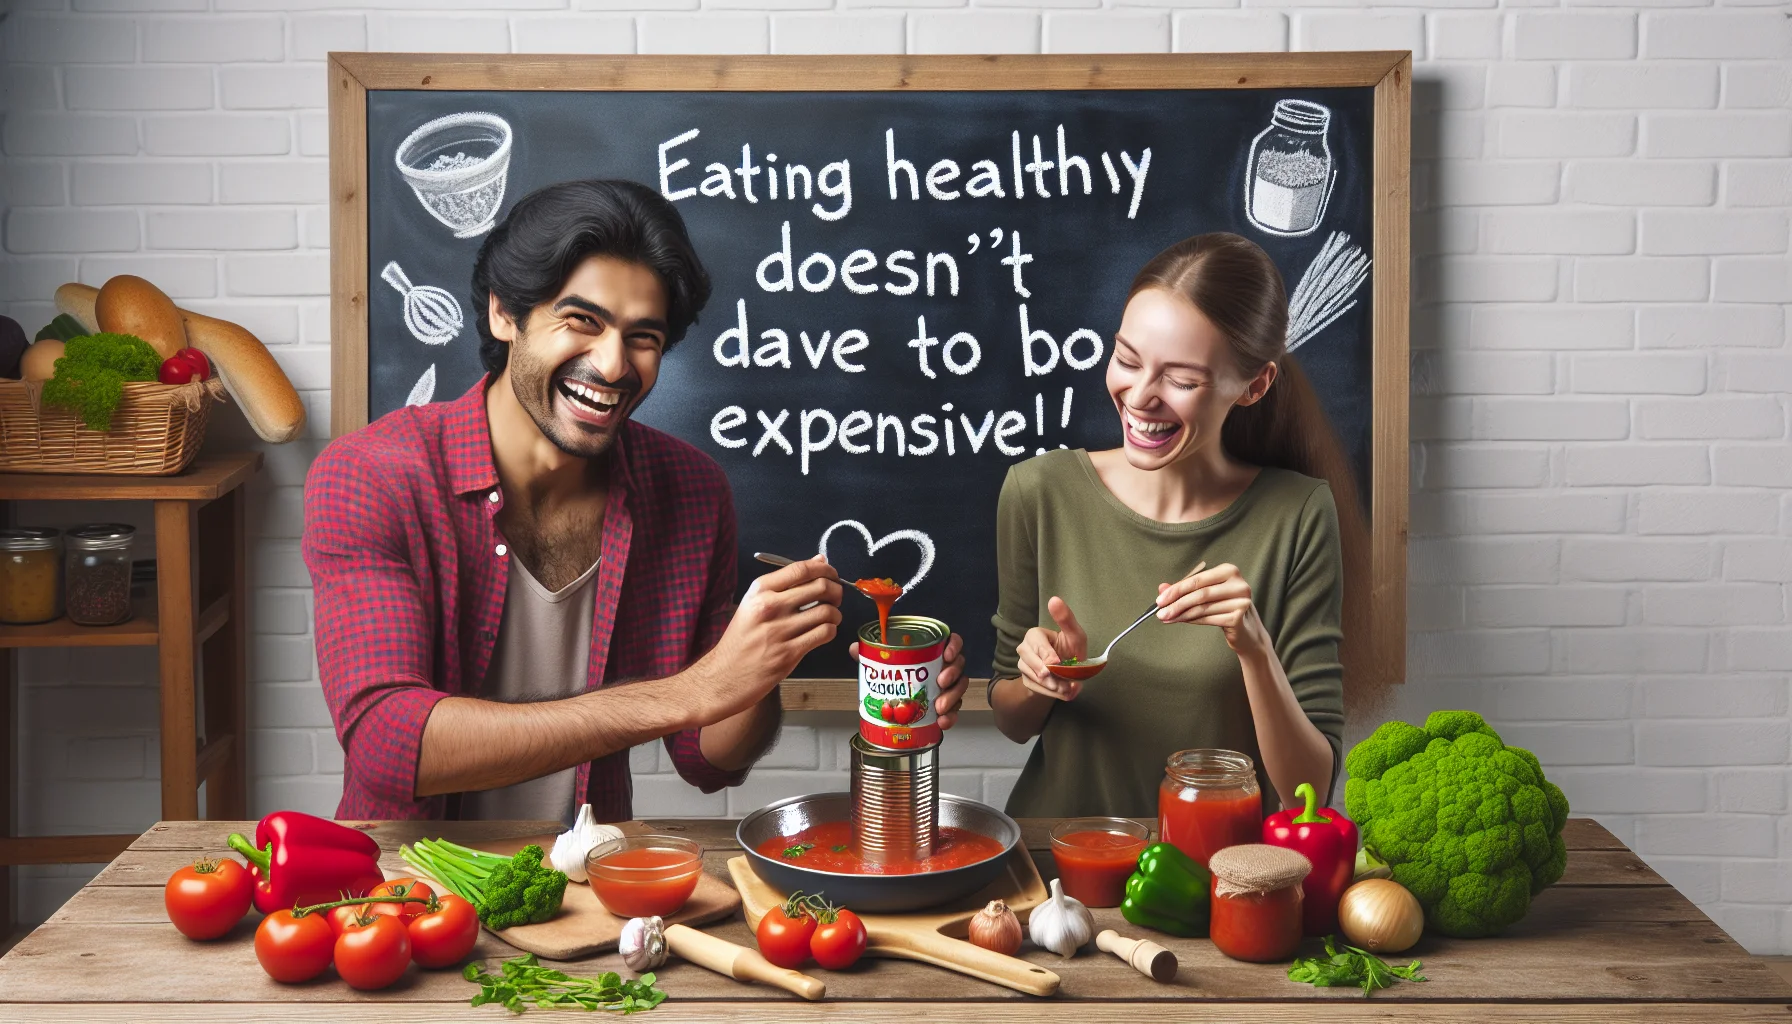 Generate an elaborate, humorous scene in which a South Asian man and a Caucasian woman are happily preparing tomato soup in a modest yet cosy kitchen. They are using canned tomato sauce, alongside fresh vegetables and herbs. On a chalkboard behind them, the phrase 'Eating healthy doesn't have to be expensive!' is written. The ingredients are arranged neatly, indicating a step-by-step guide to making tomato soup from tomato sauce. Their eagerness and enjoyment in cooking the simple meal exude the essence of preparing a wholesome yet budget-friendly meal.